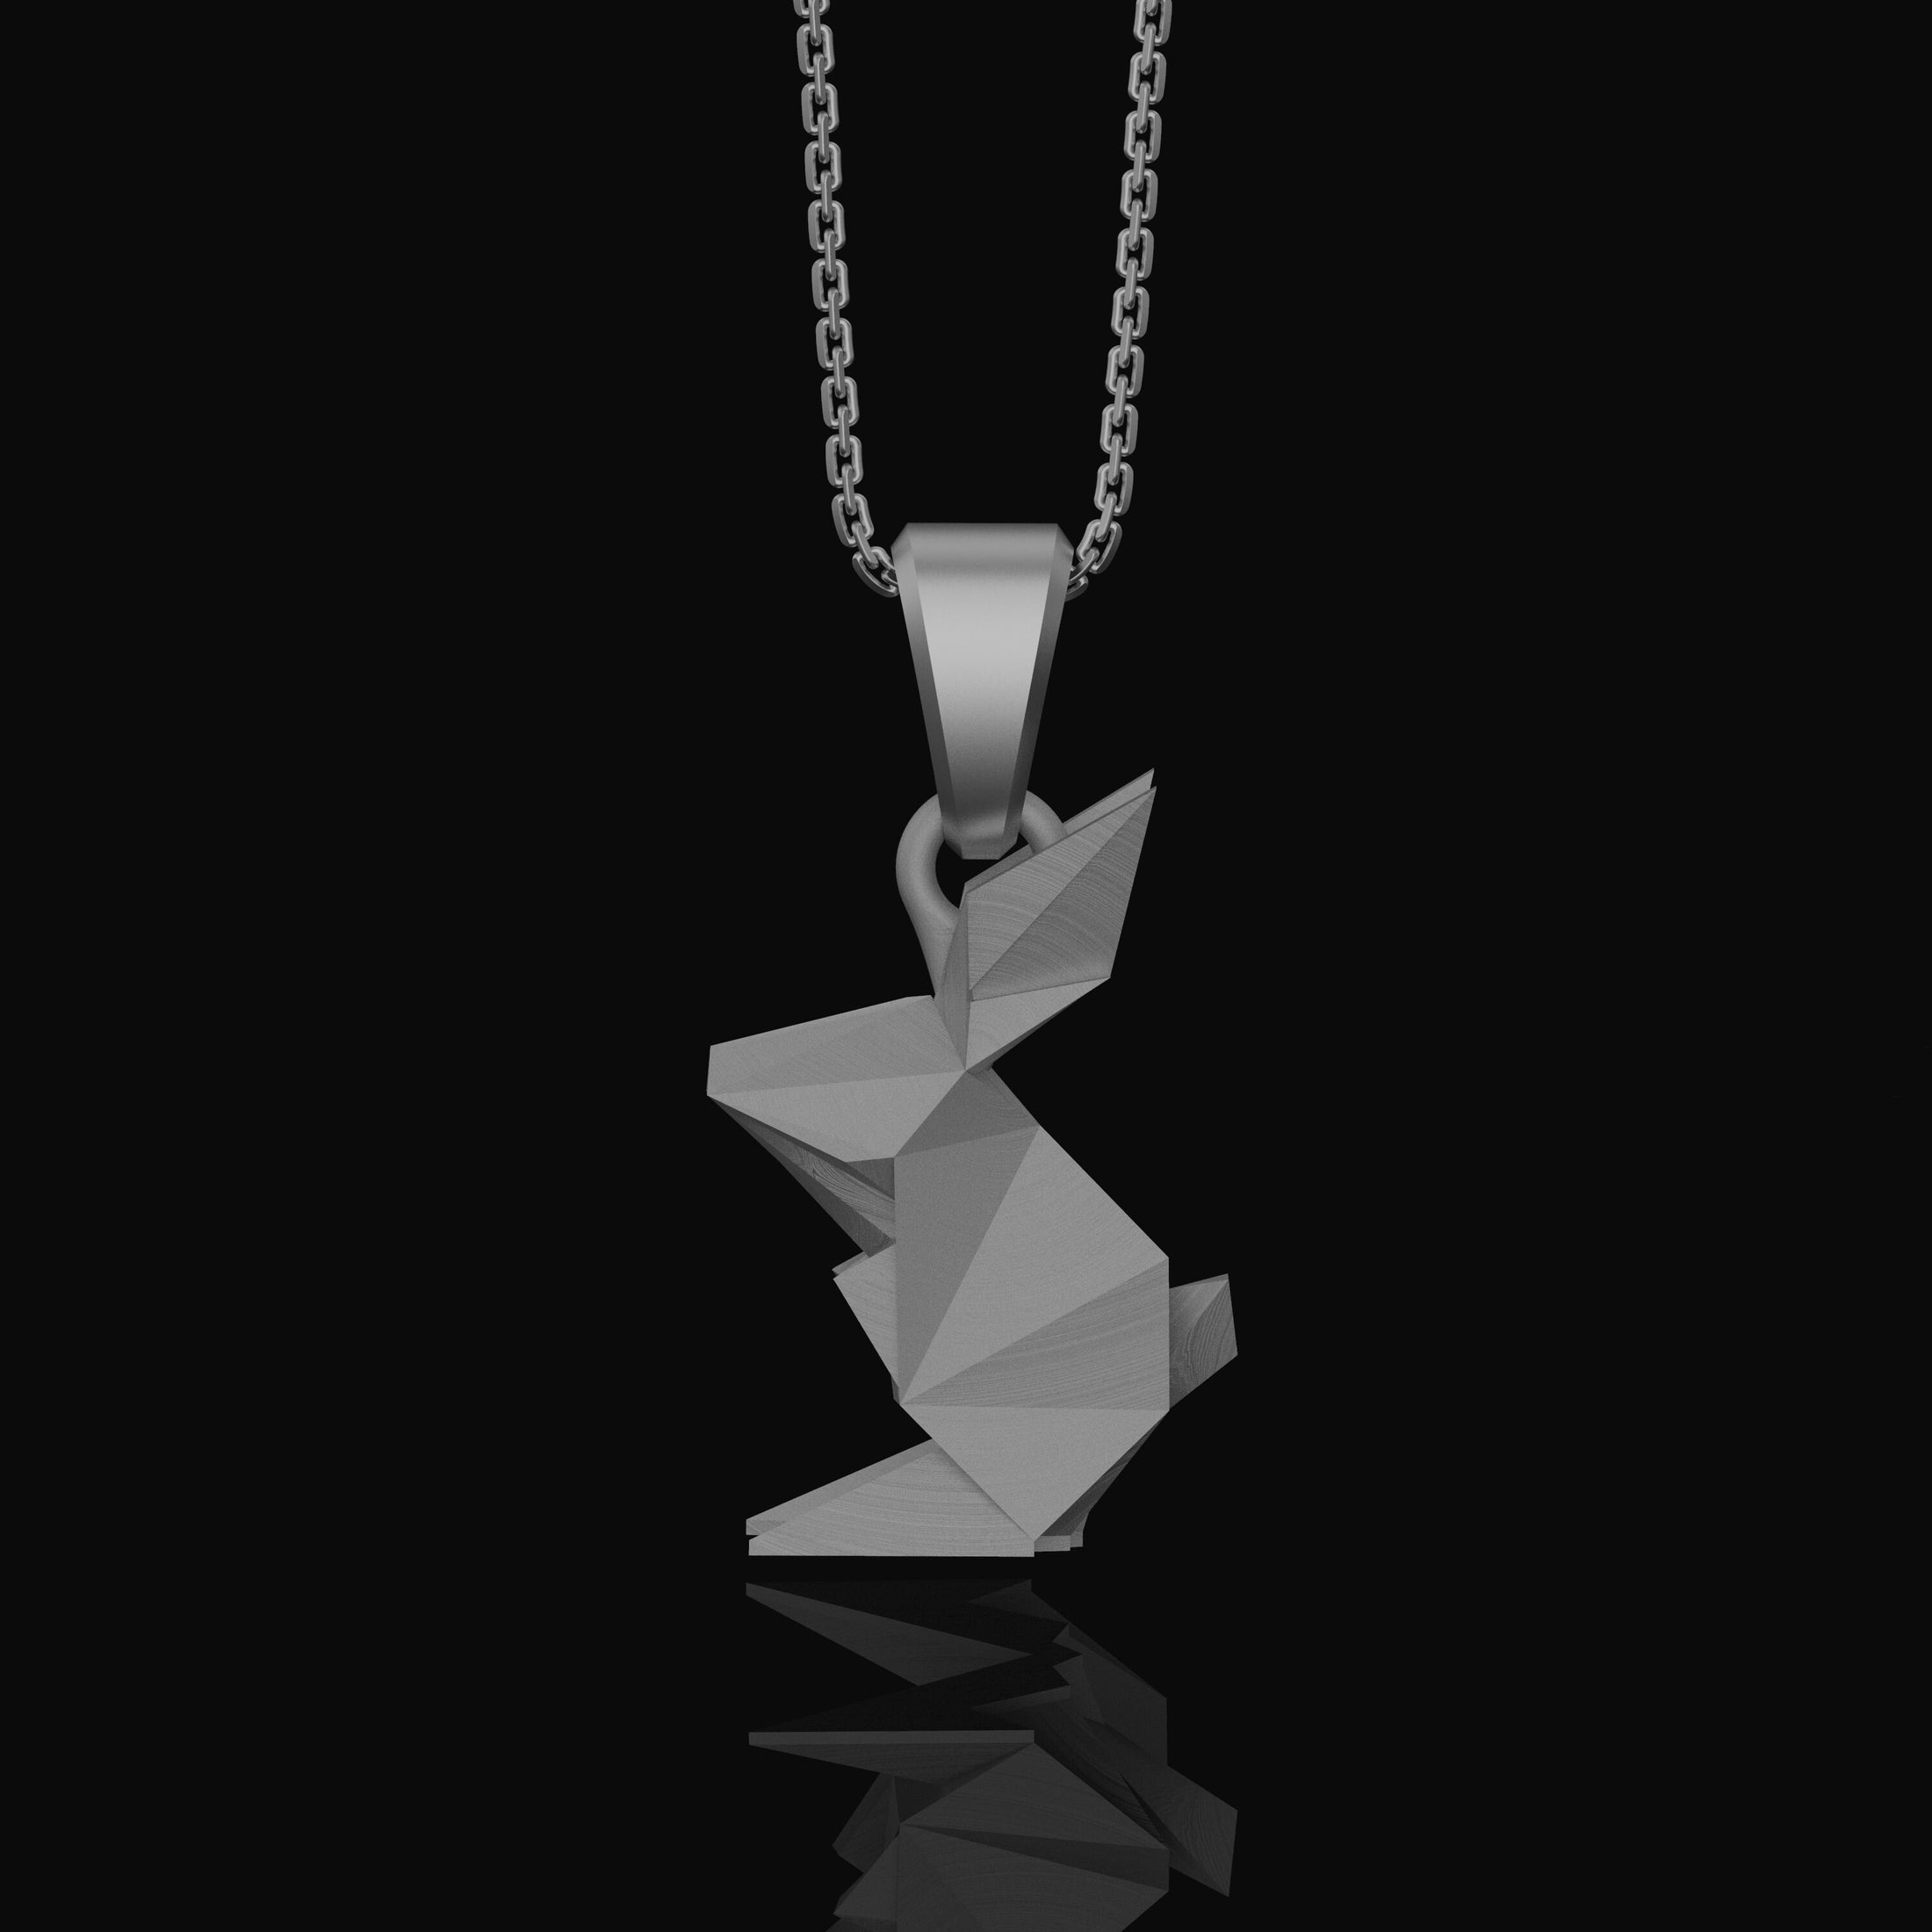 Origami Rabbit Charm Necklace - Elegant Silver Pendant, Chic Folded Bunny Design, Perfect Artistic Gift for Her Polished Matte